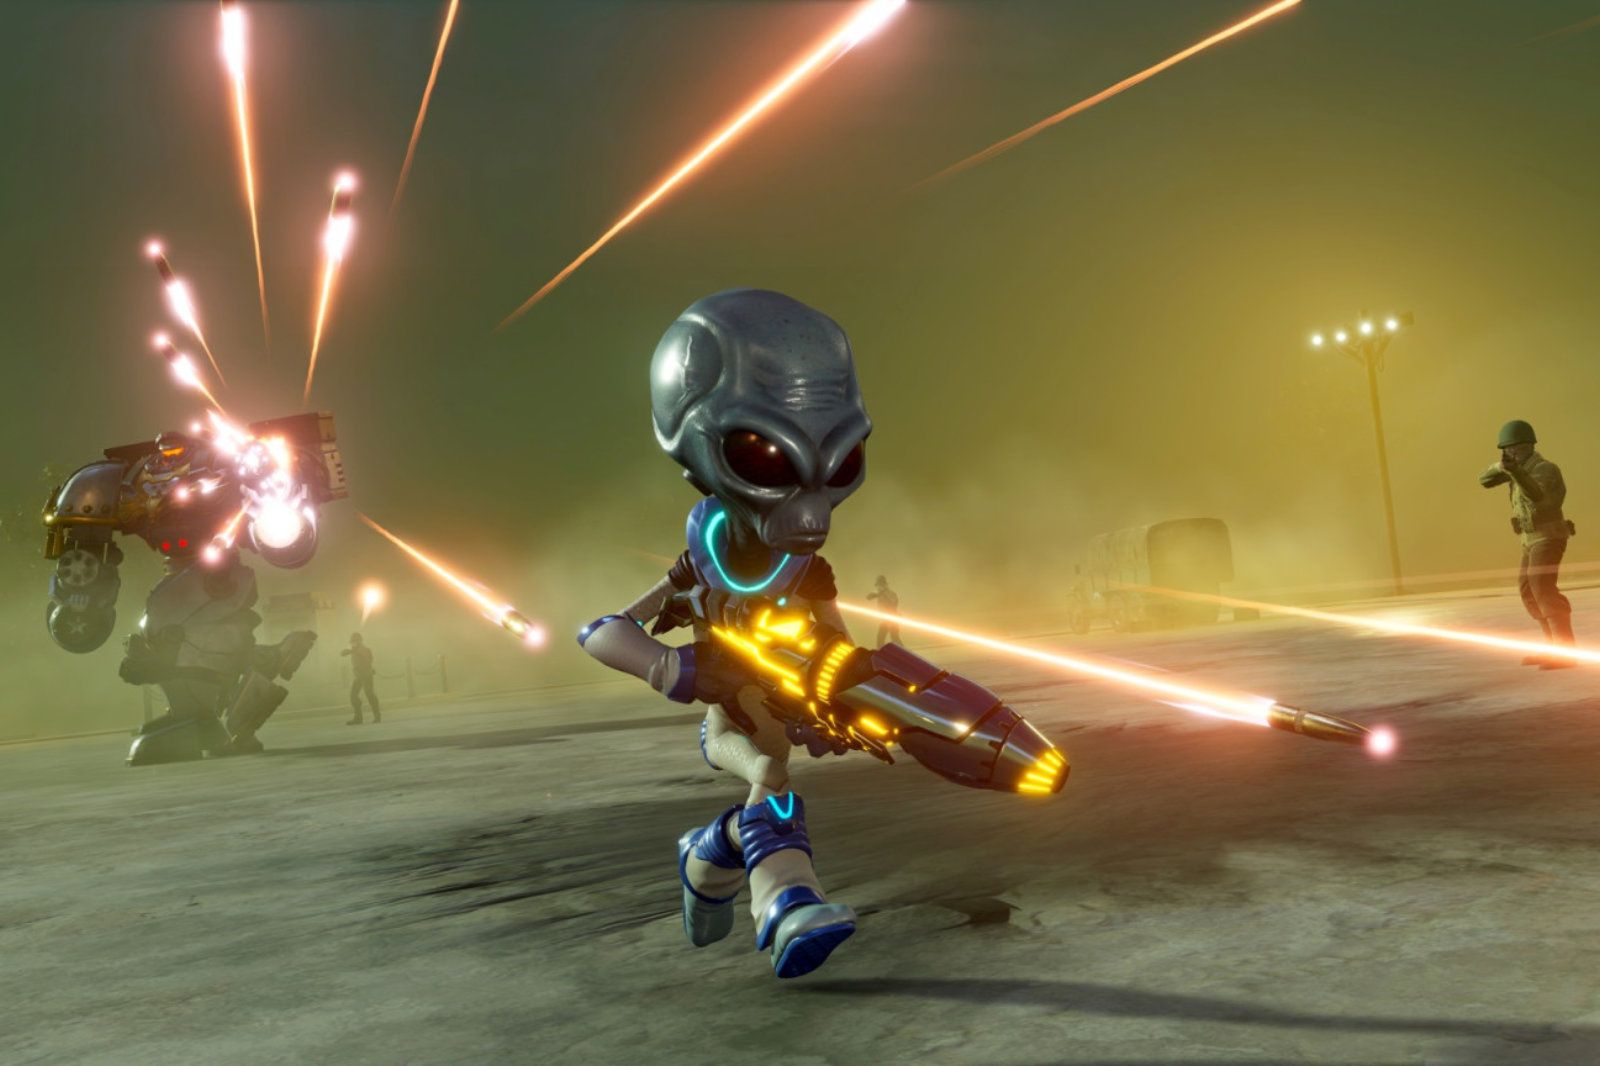 Xbox Summer Game Fest will let you play 60 brand new game demos including Destroy All Humans! reboot photo 1